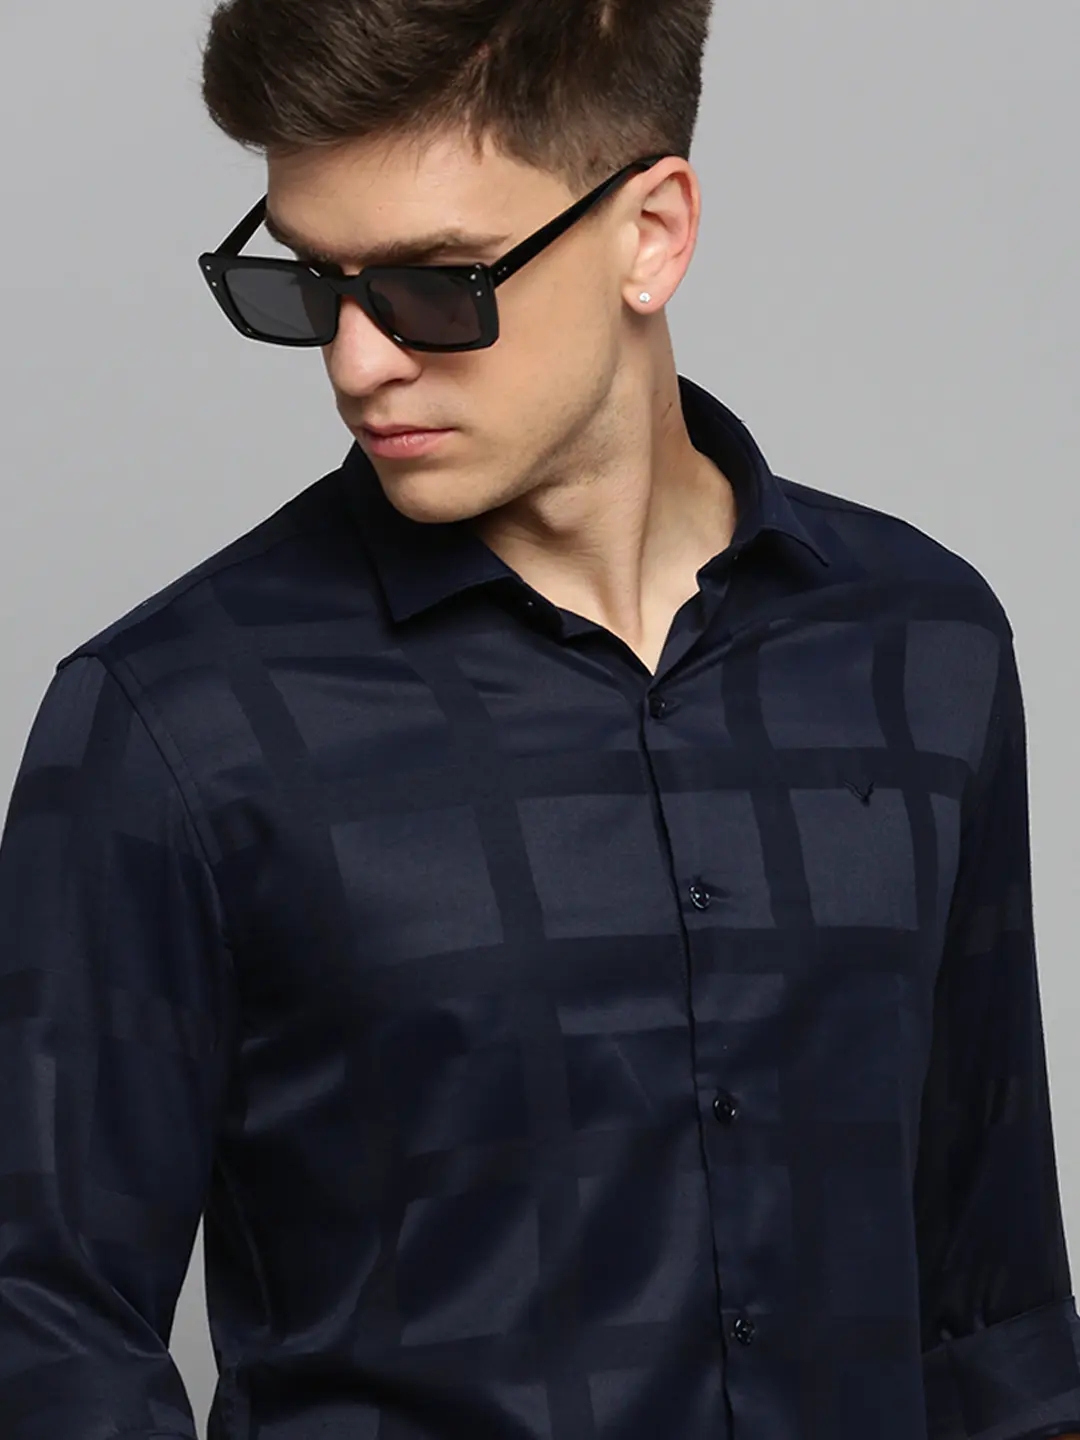 Showoff | SHOWOFF Men's Spread Collar Solid Navy Blue Classic Shirt